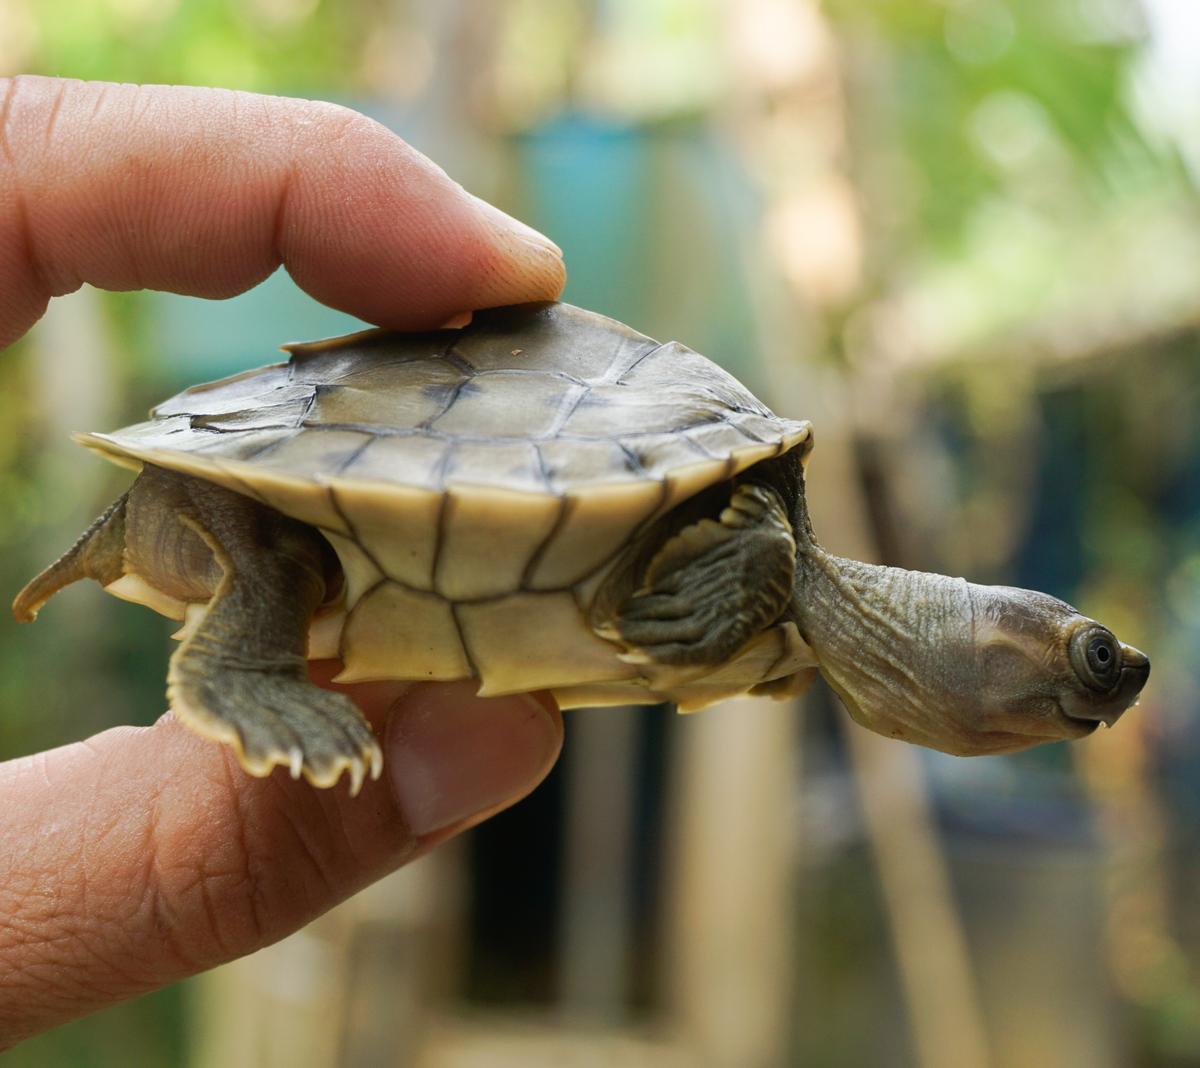 Burmese roofed turtle hatchling being handled (<a href="https://newsroom.wcs.org/News-Releases/articleType/ArticleView/articleId/14807/PHOTO-RELEASE-The-Turtle-that-Almost-Went-Extinct-Now-Ready-for-Its-Close-up.aspx">Myo Min Win</a>/WCS Myanmar Program)